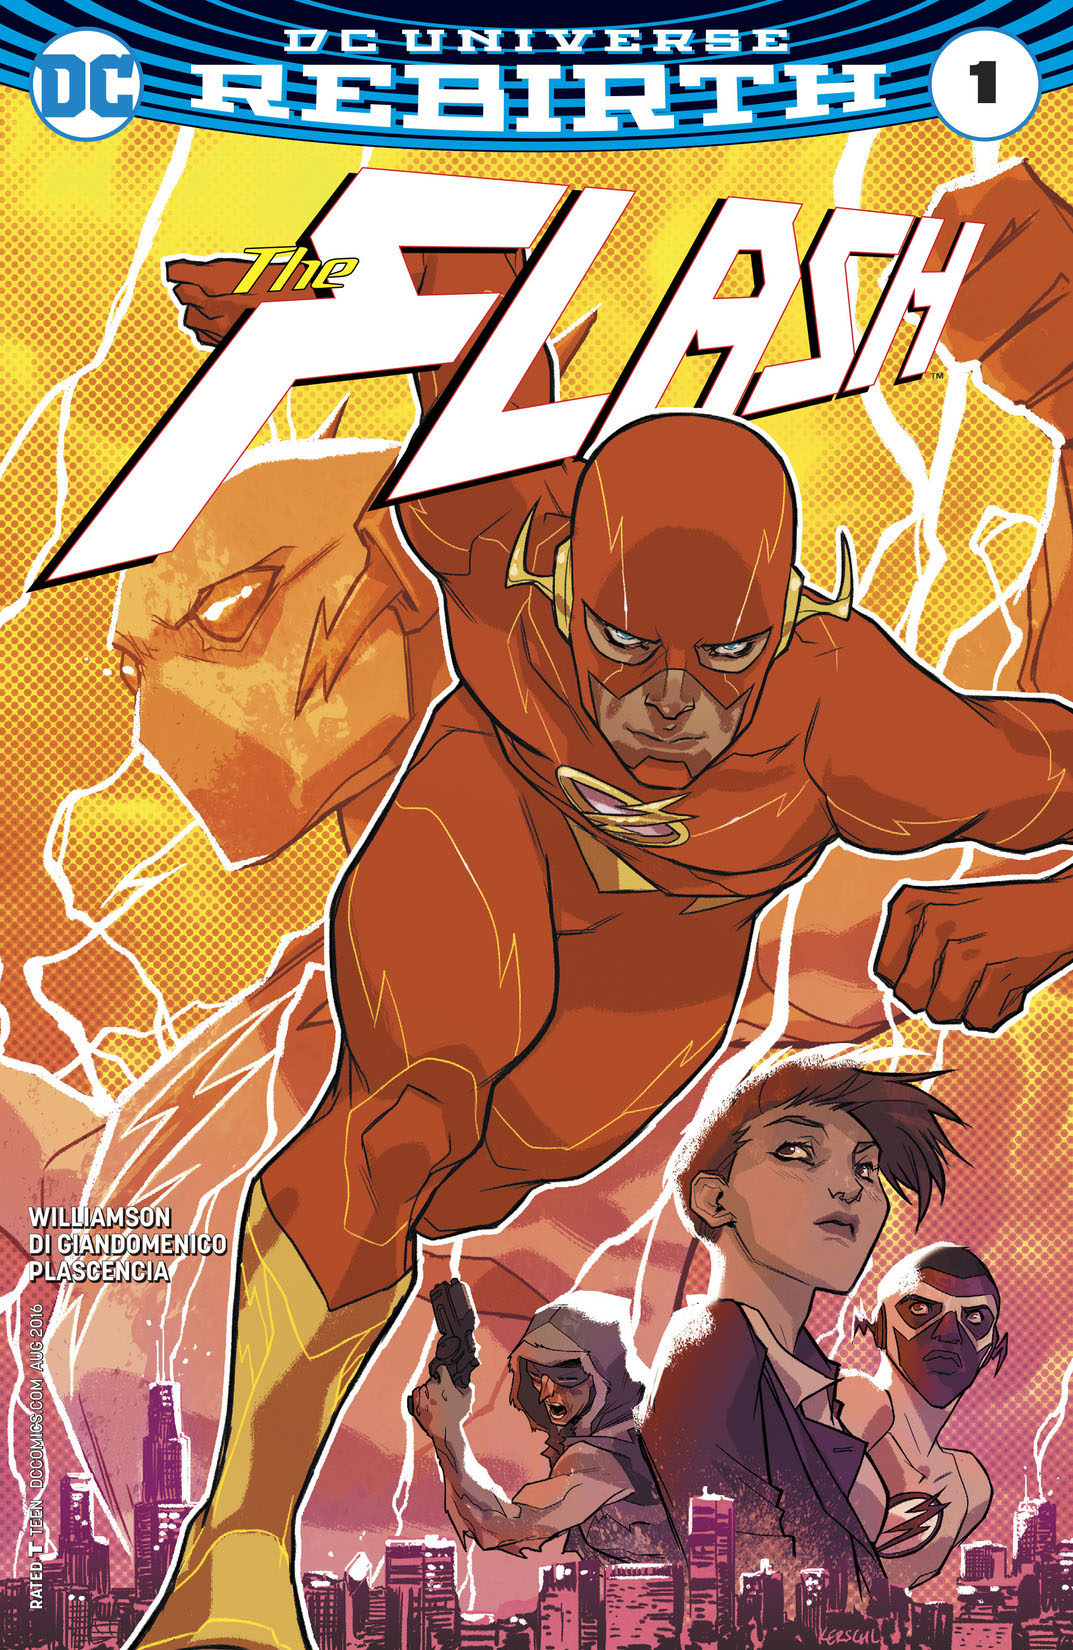 The Flash (2016-) #1 preview images